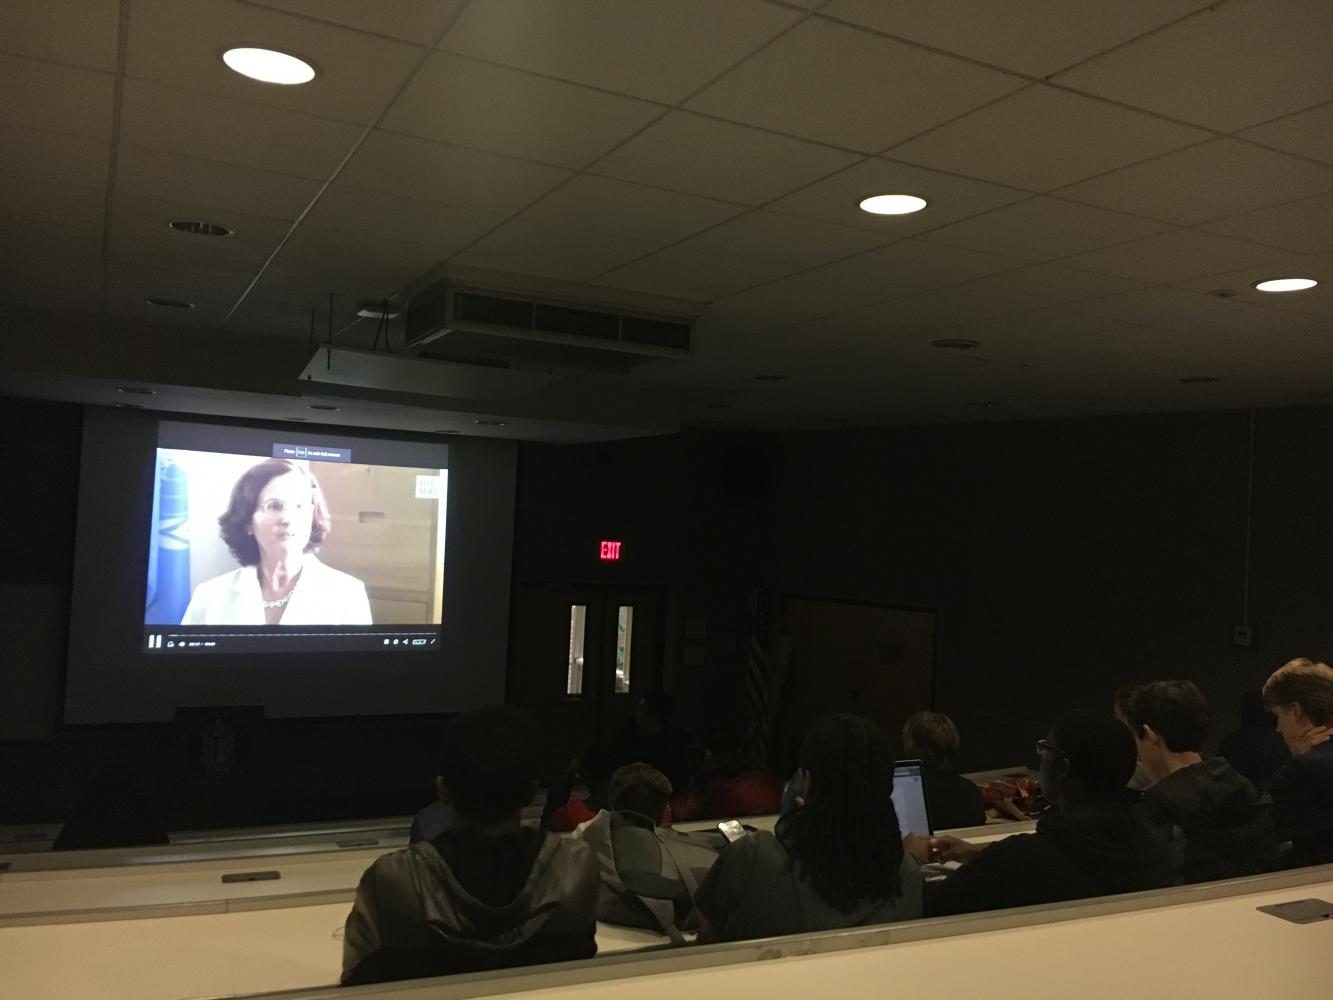 The+students+attentively+watch+the+documentary+on+the+Rohingya+in+Myanmar.